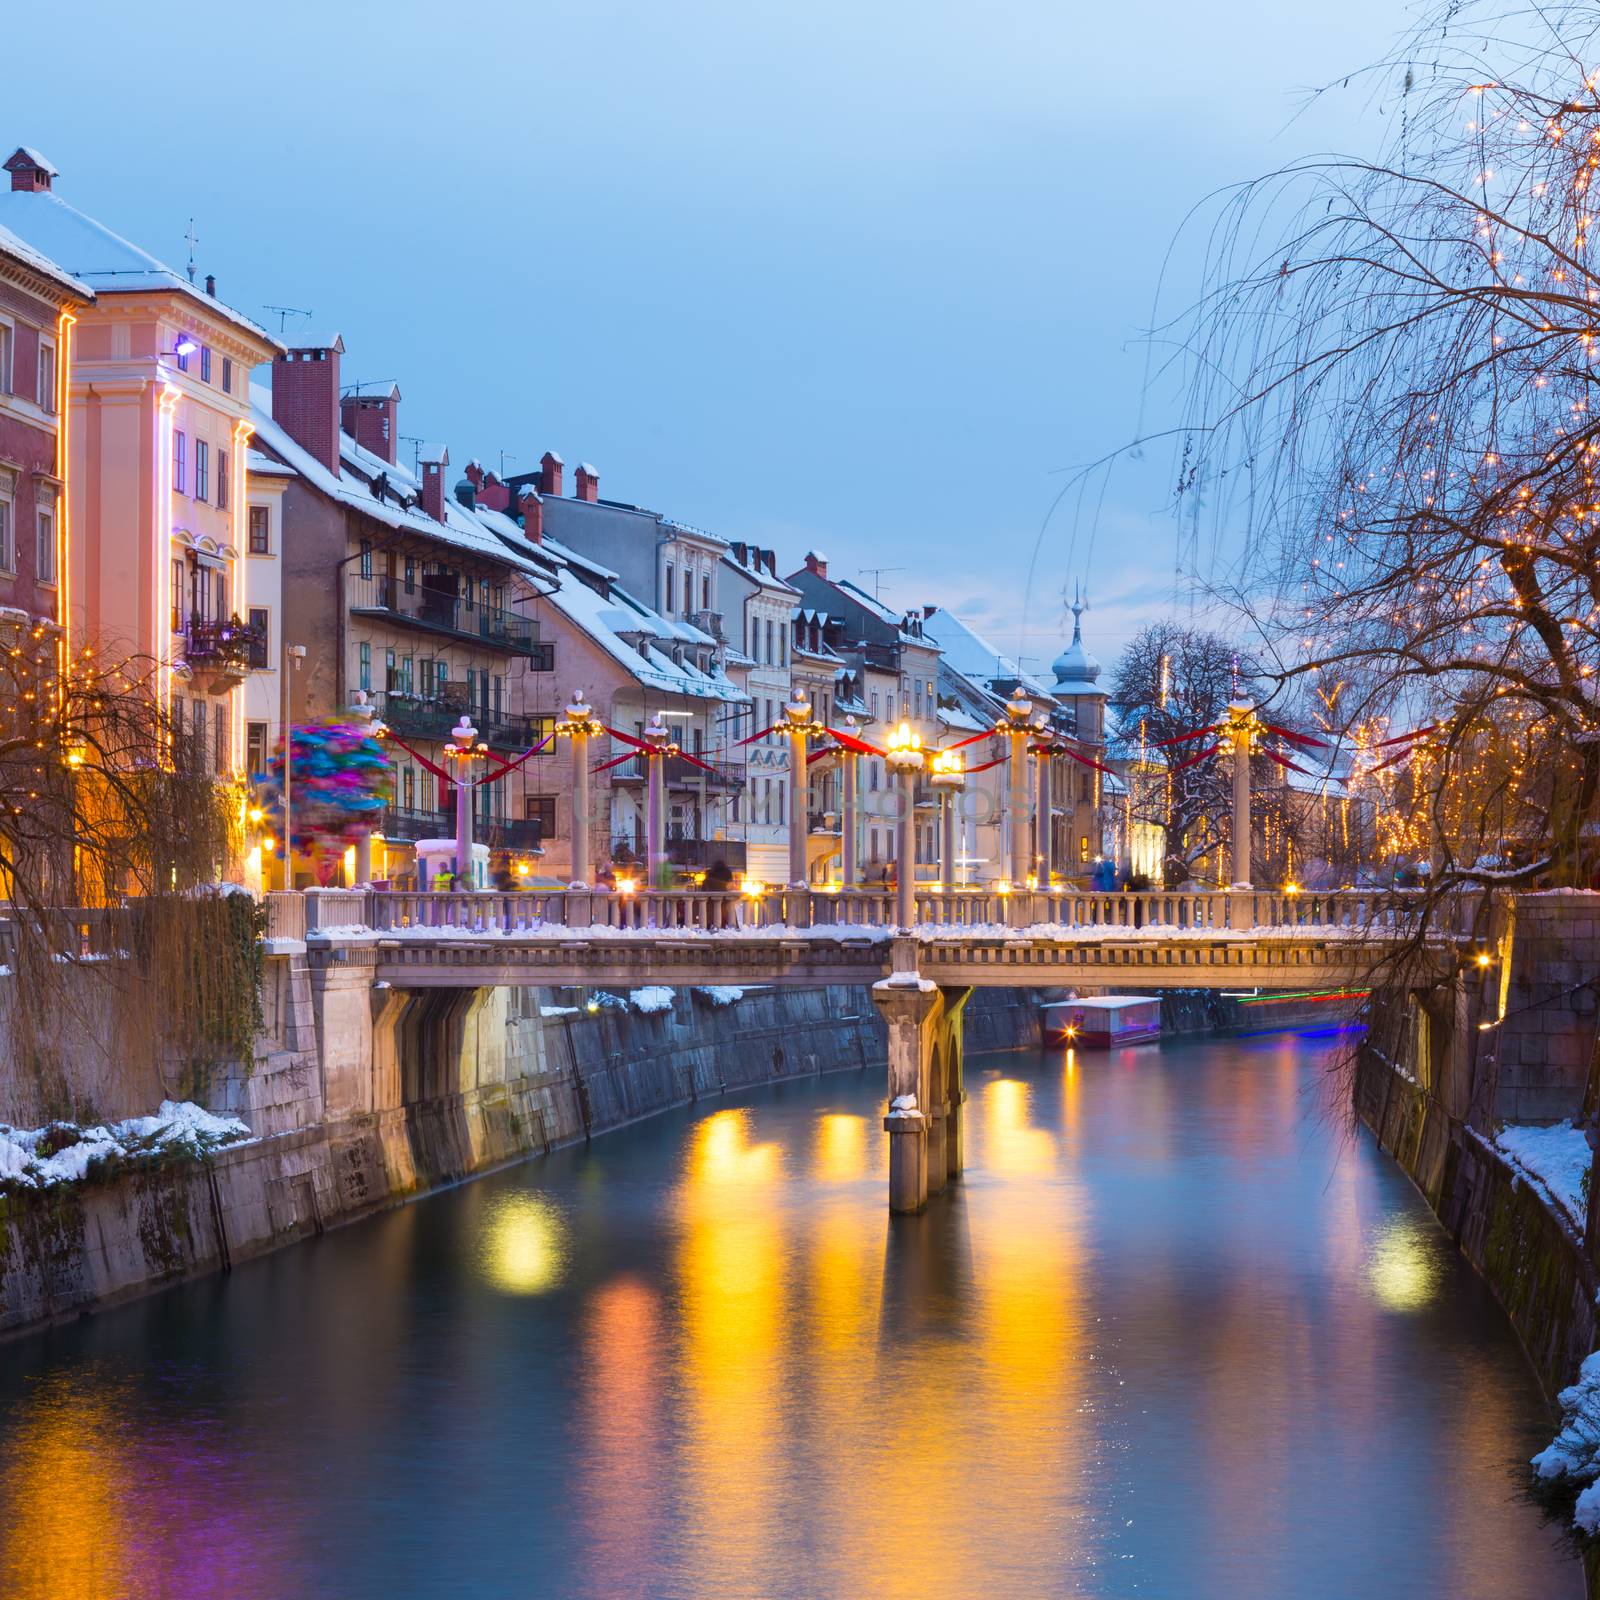 View of lively river Ljubljanica bank with Cobblers' Bridge in old city center decorated with Christmas lights. Ljubljana, Slovenia, Europe. Shot at dusk.